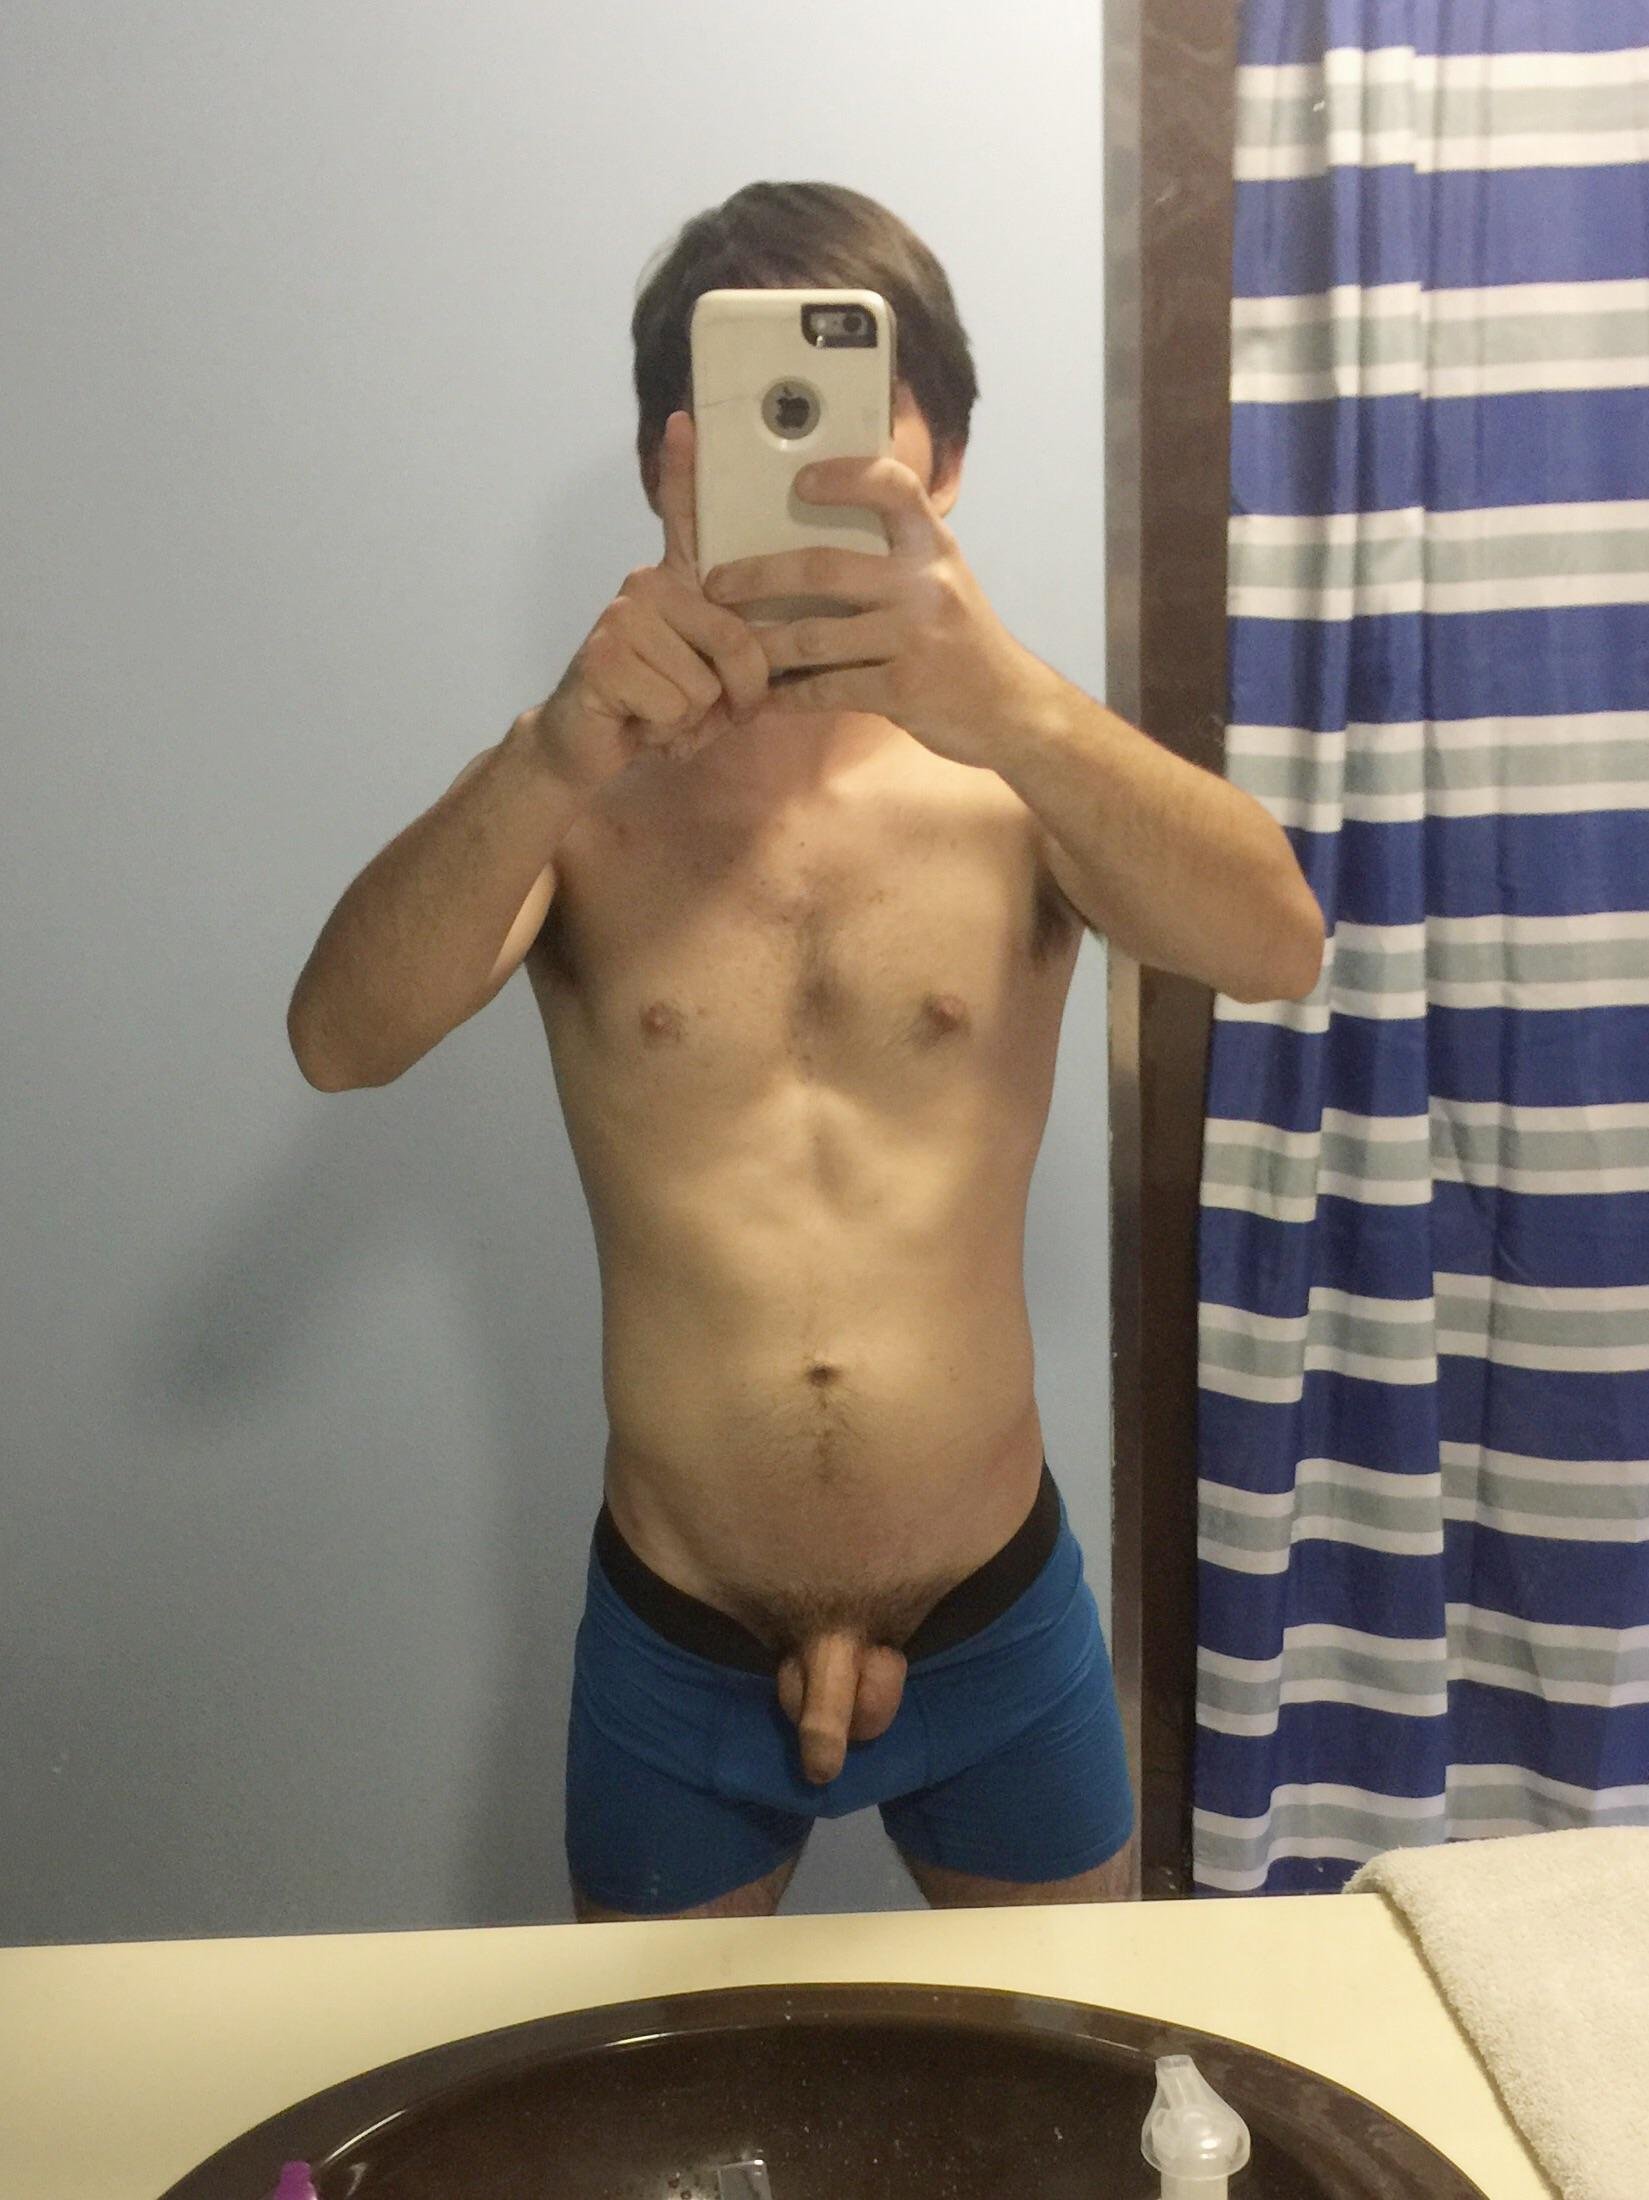 Really self conscious about my body and penis